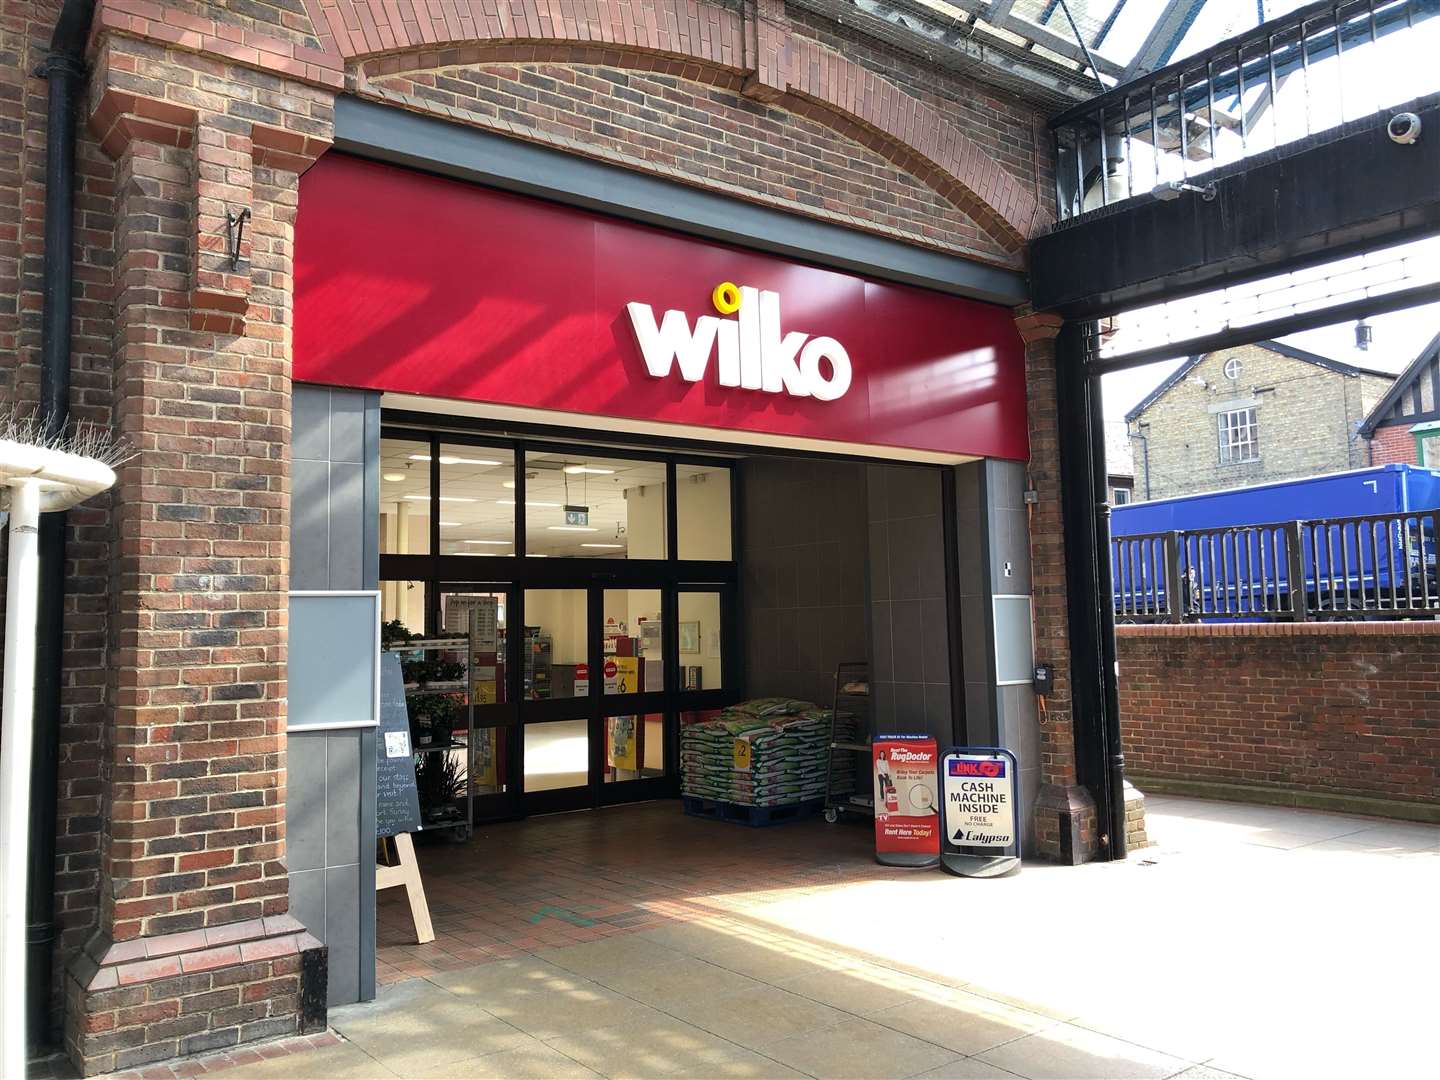 The thefts took place in Wilko in Ashford